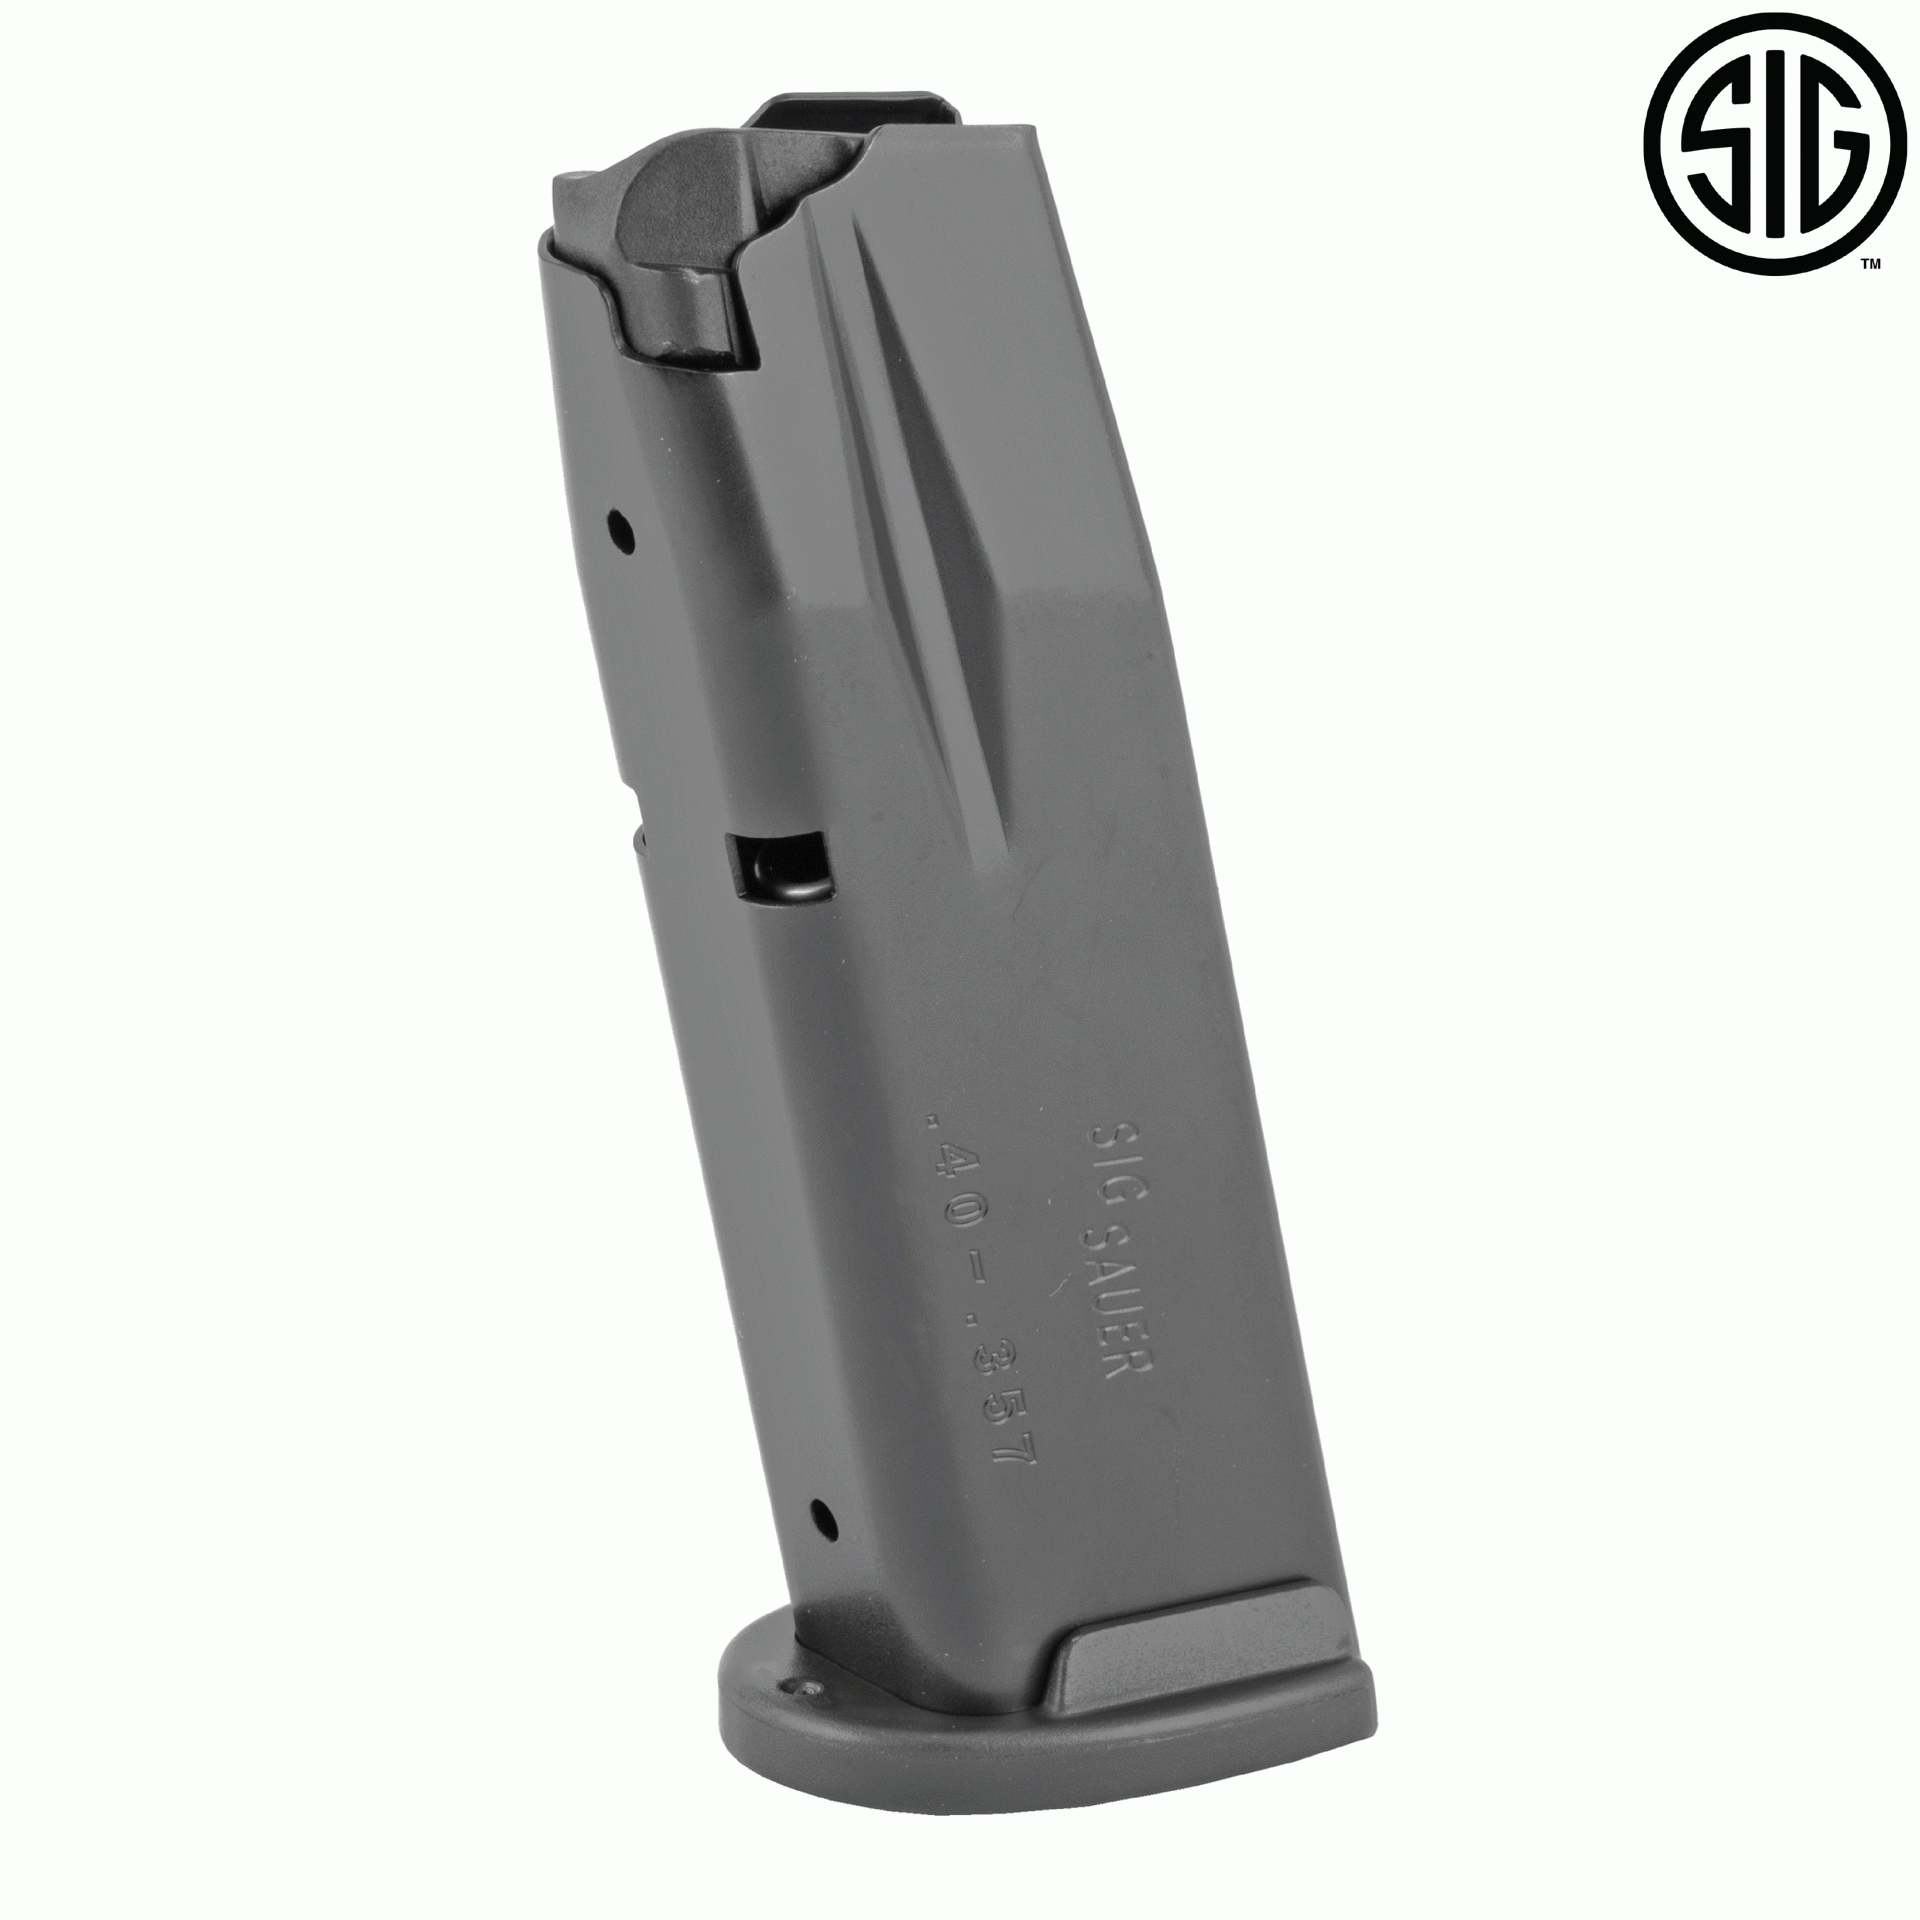 Sig Sauer P250 Subcompact in 40/357 10rd Magazine 1300279 for sale online 